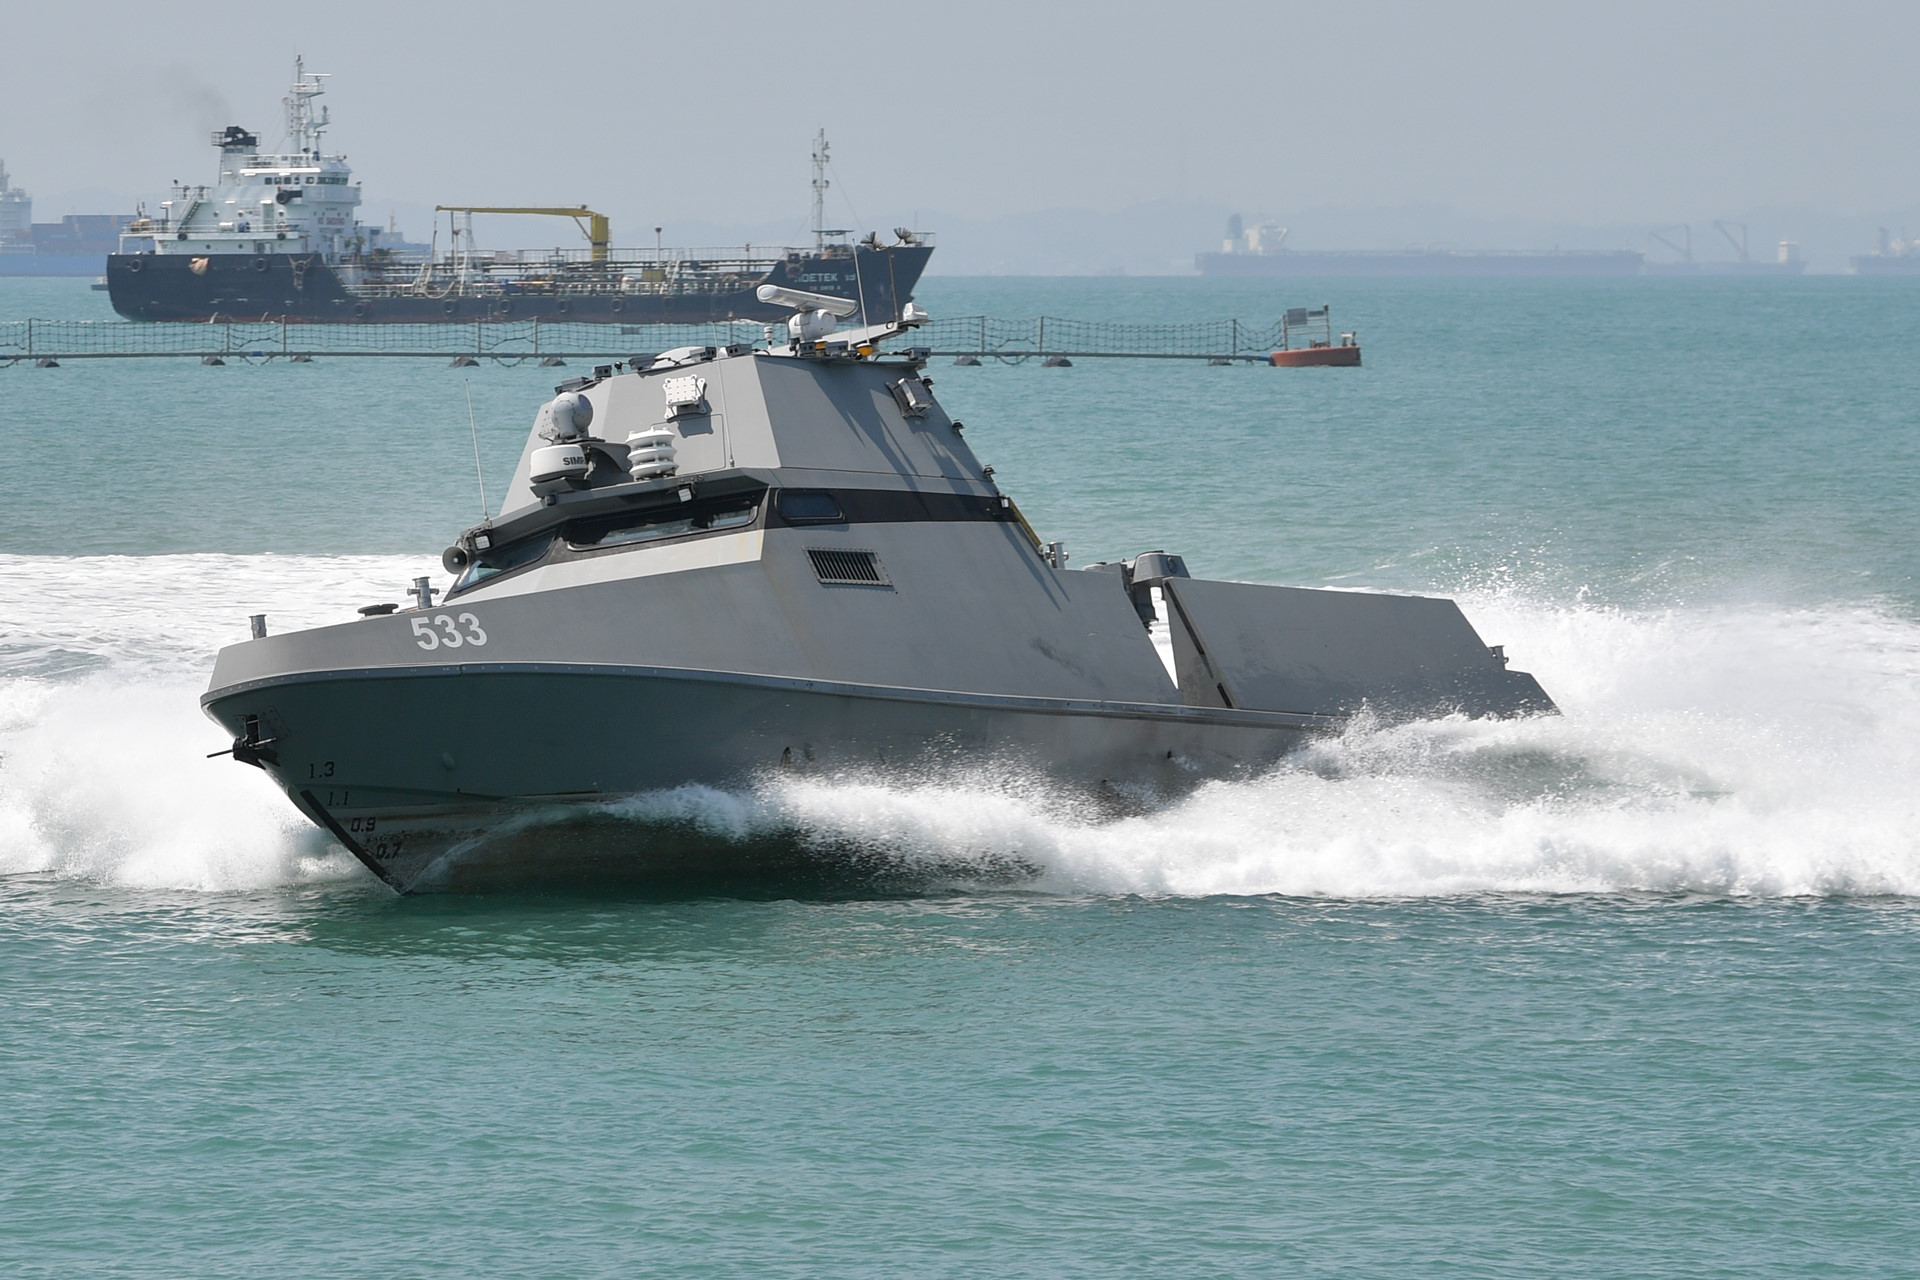 The Maritime Security USV can provide a persistent presence to patrol Singapore's waters.